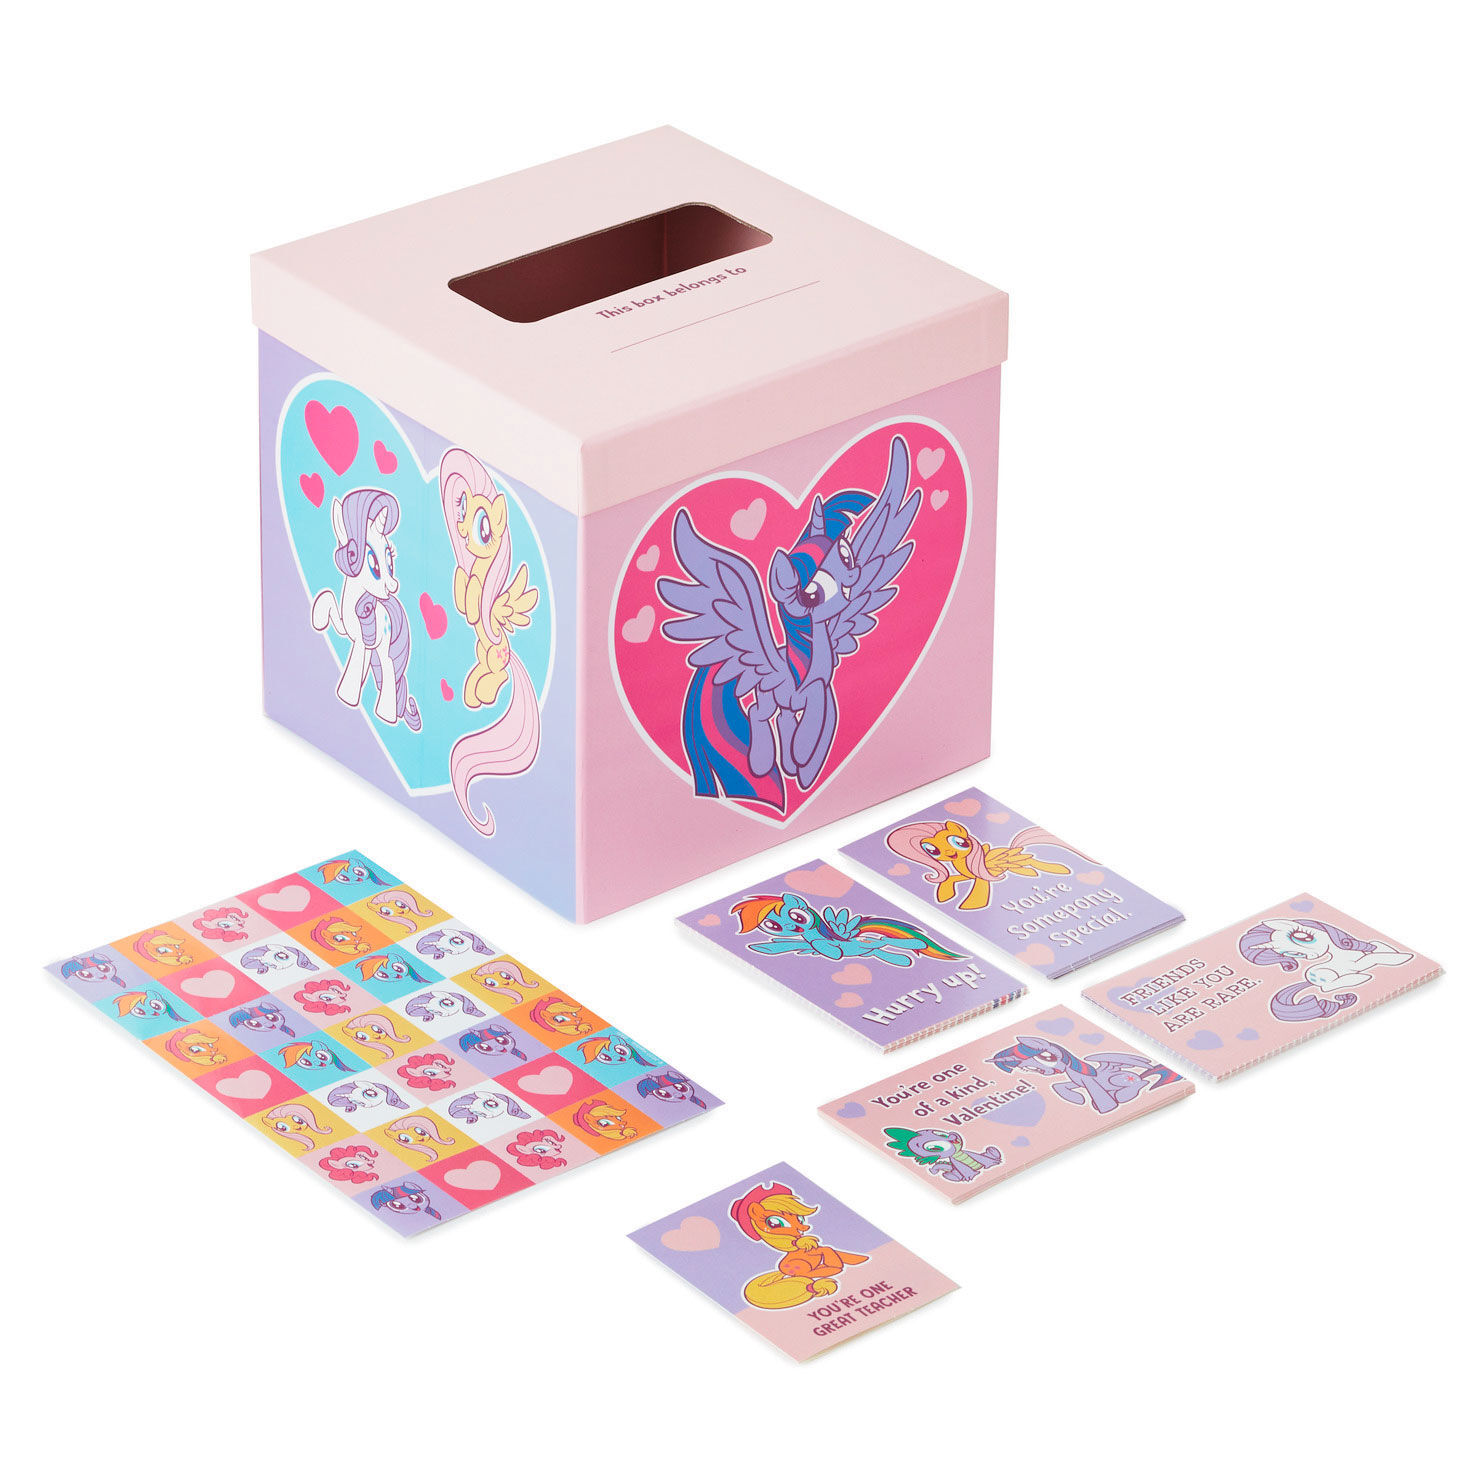 Hasbro® My Little Pony™ Kids Classroom Valentines Kit With Cards, Stickers and Mailbox for only USD 9.99 | Hallmark